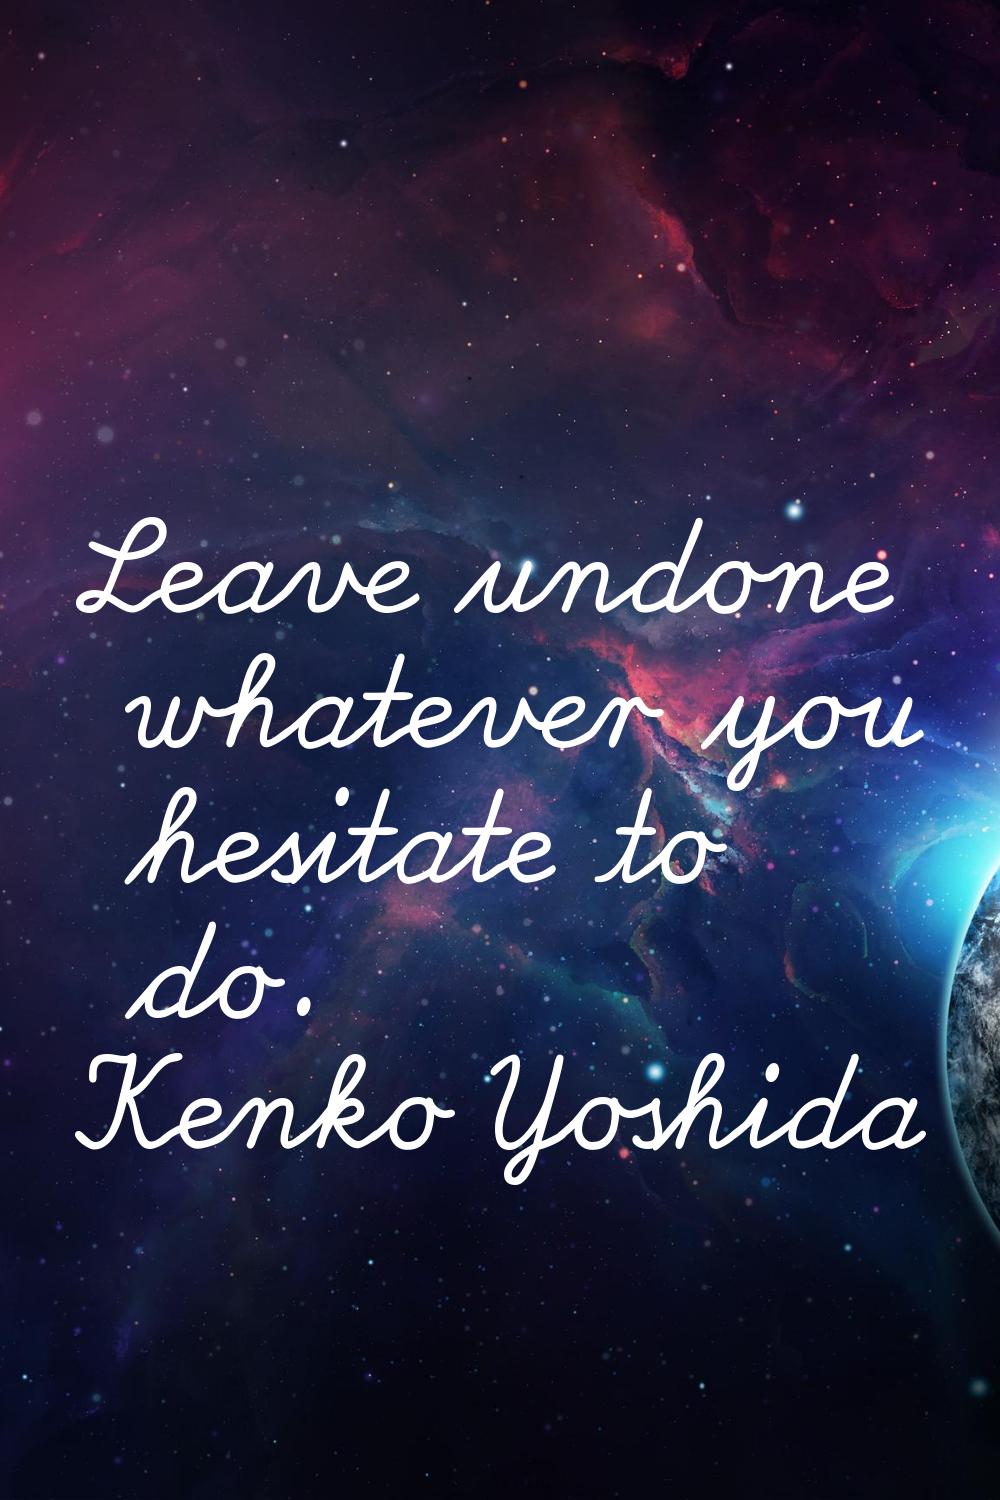 Leave undone whatever you hesitate to do.